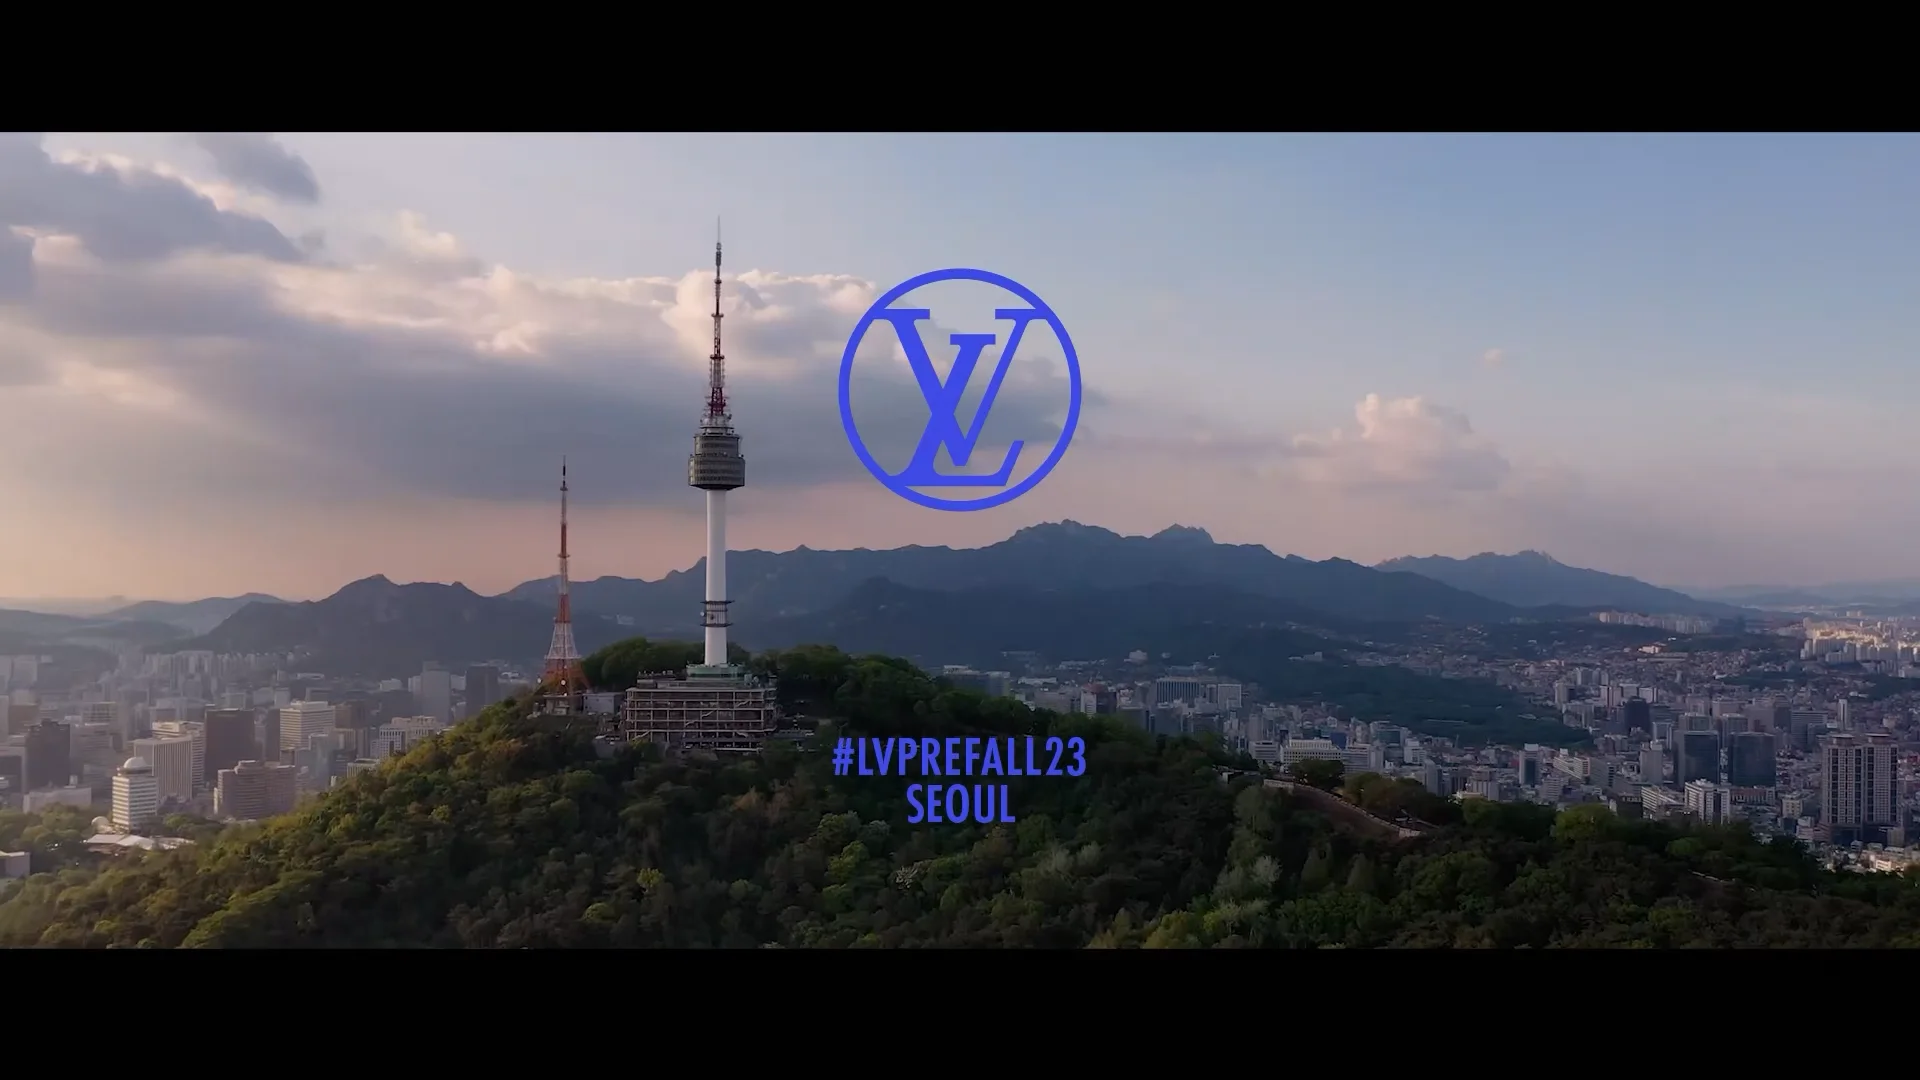 LIVE: Watch The Louis Vuitton Pre-Fall 2023 Show Live From Seoul!